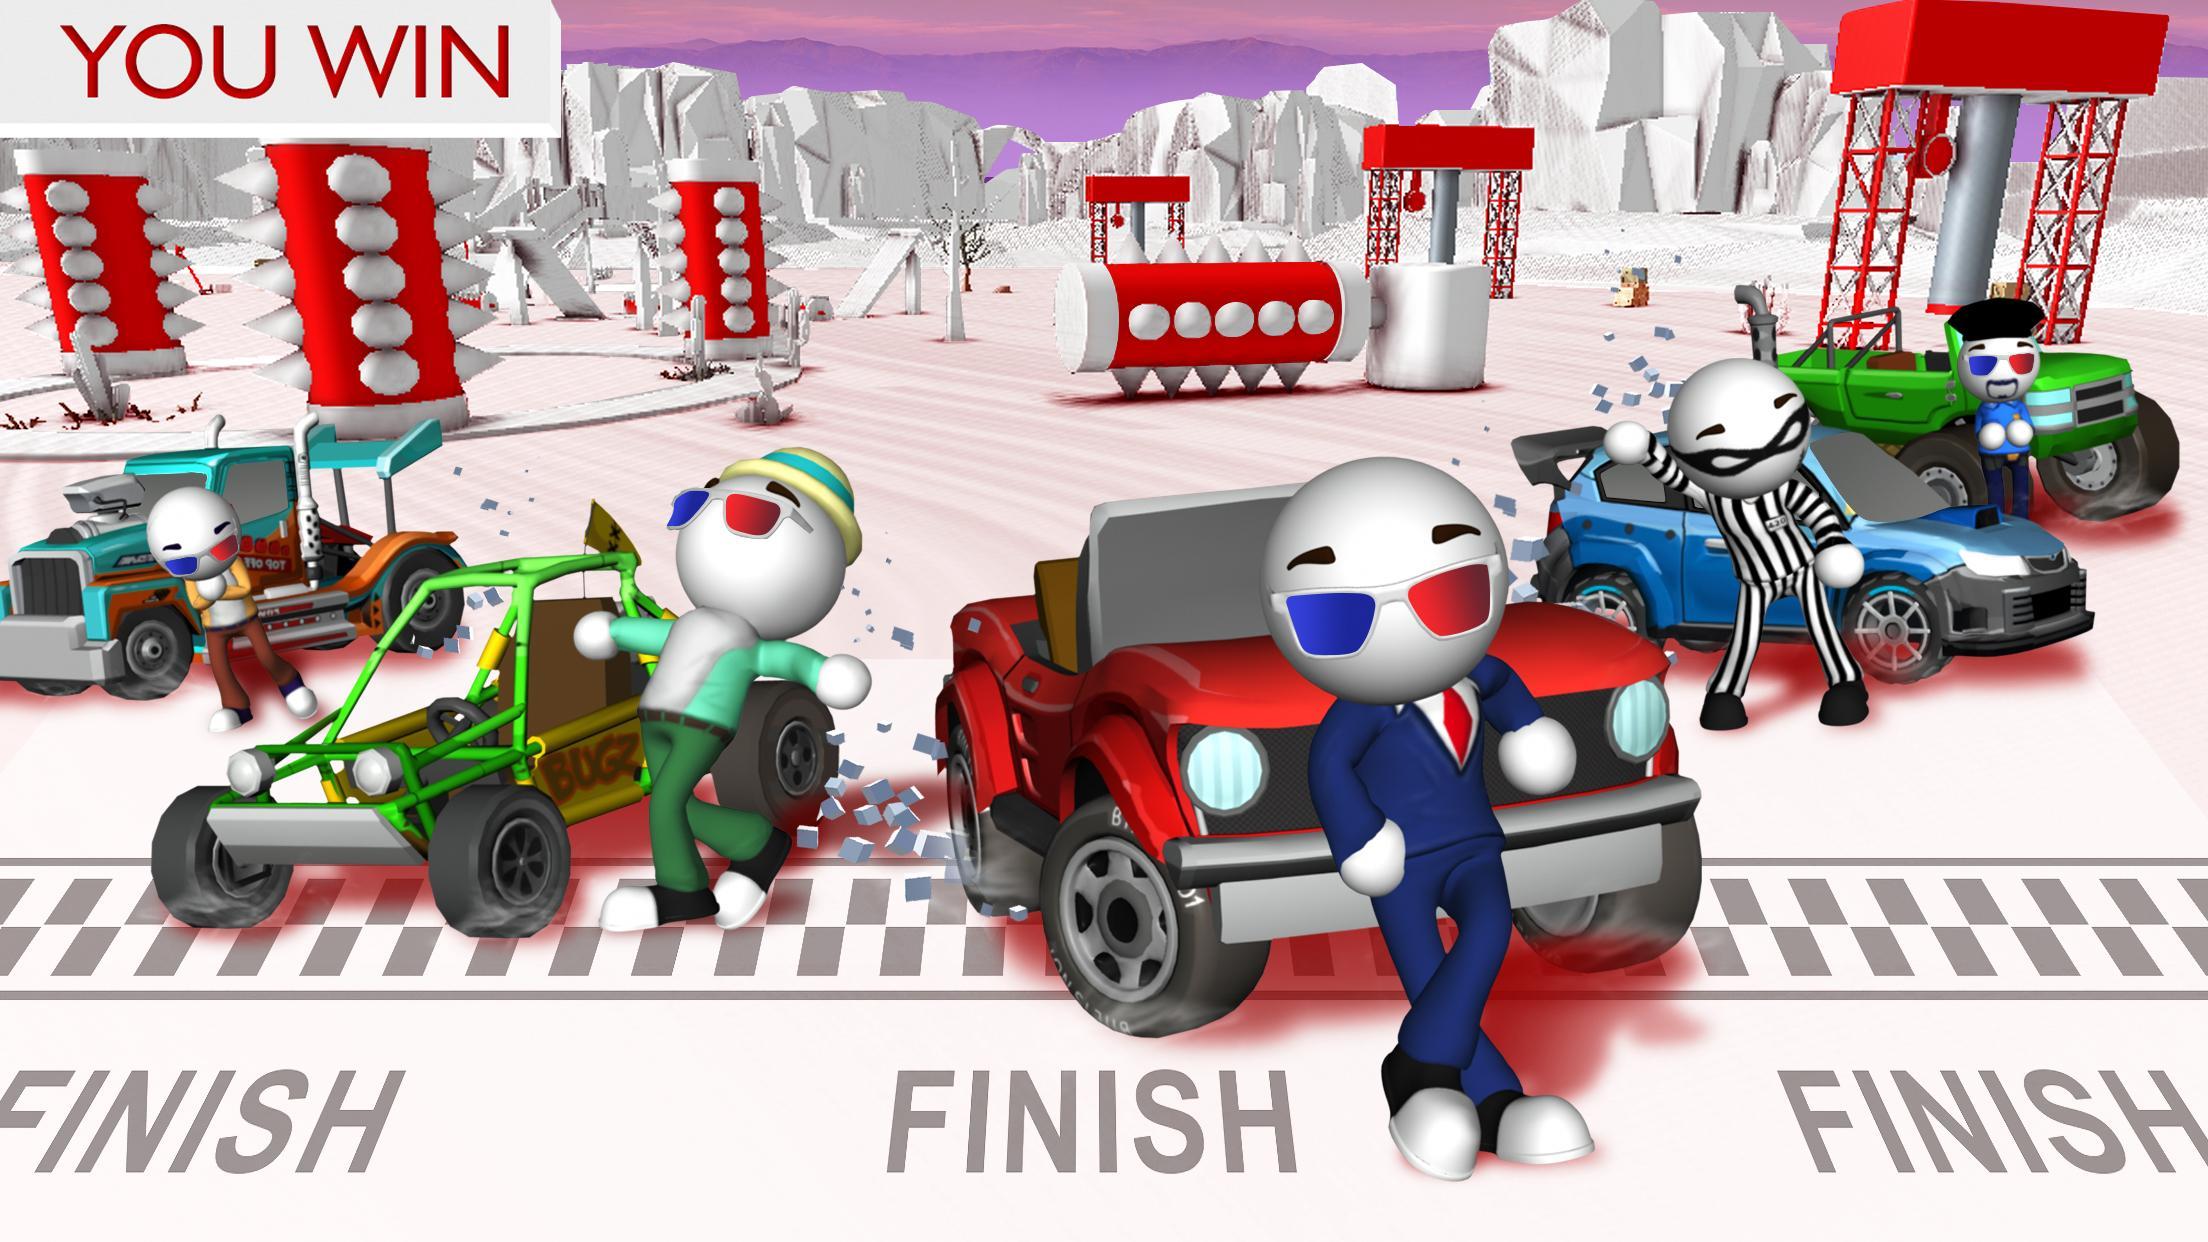 Crushed гонки. Crush гонка игра. Crush car 2001 old game for compyuter. Crushing cars игра